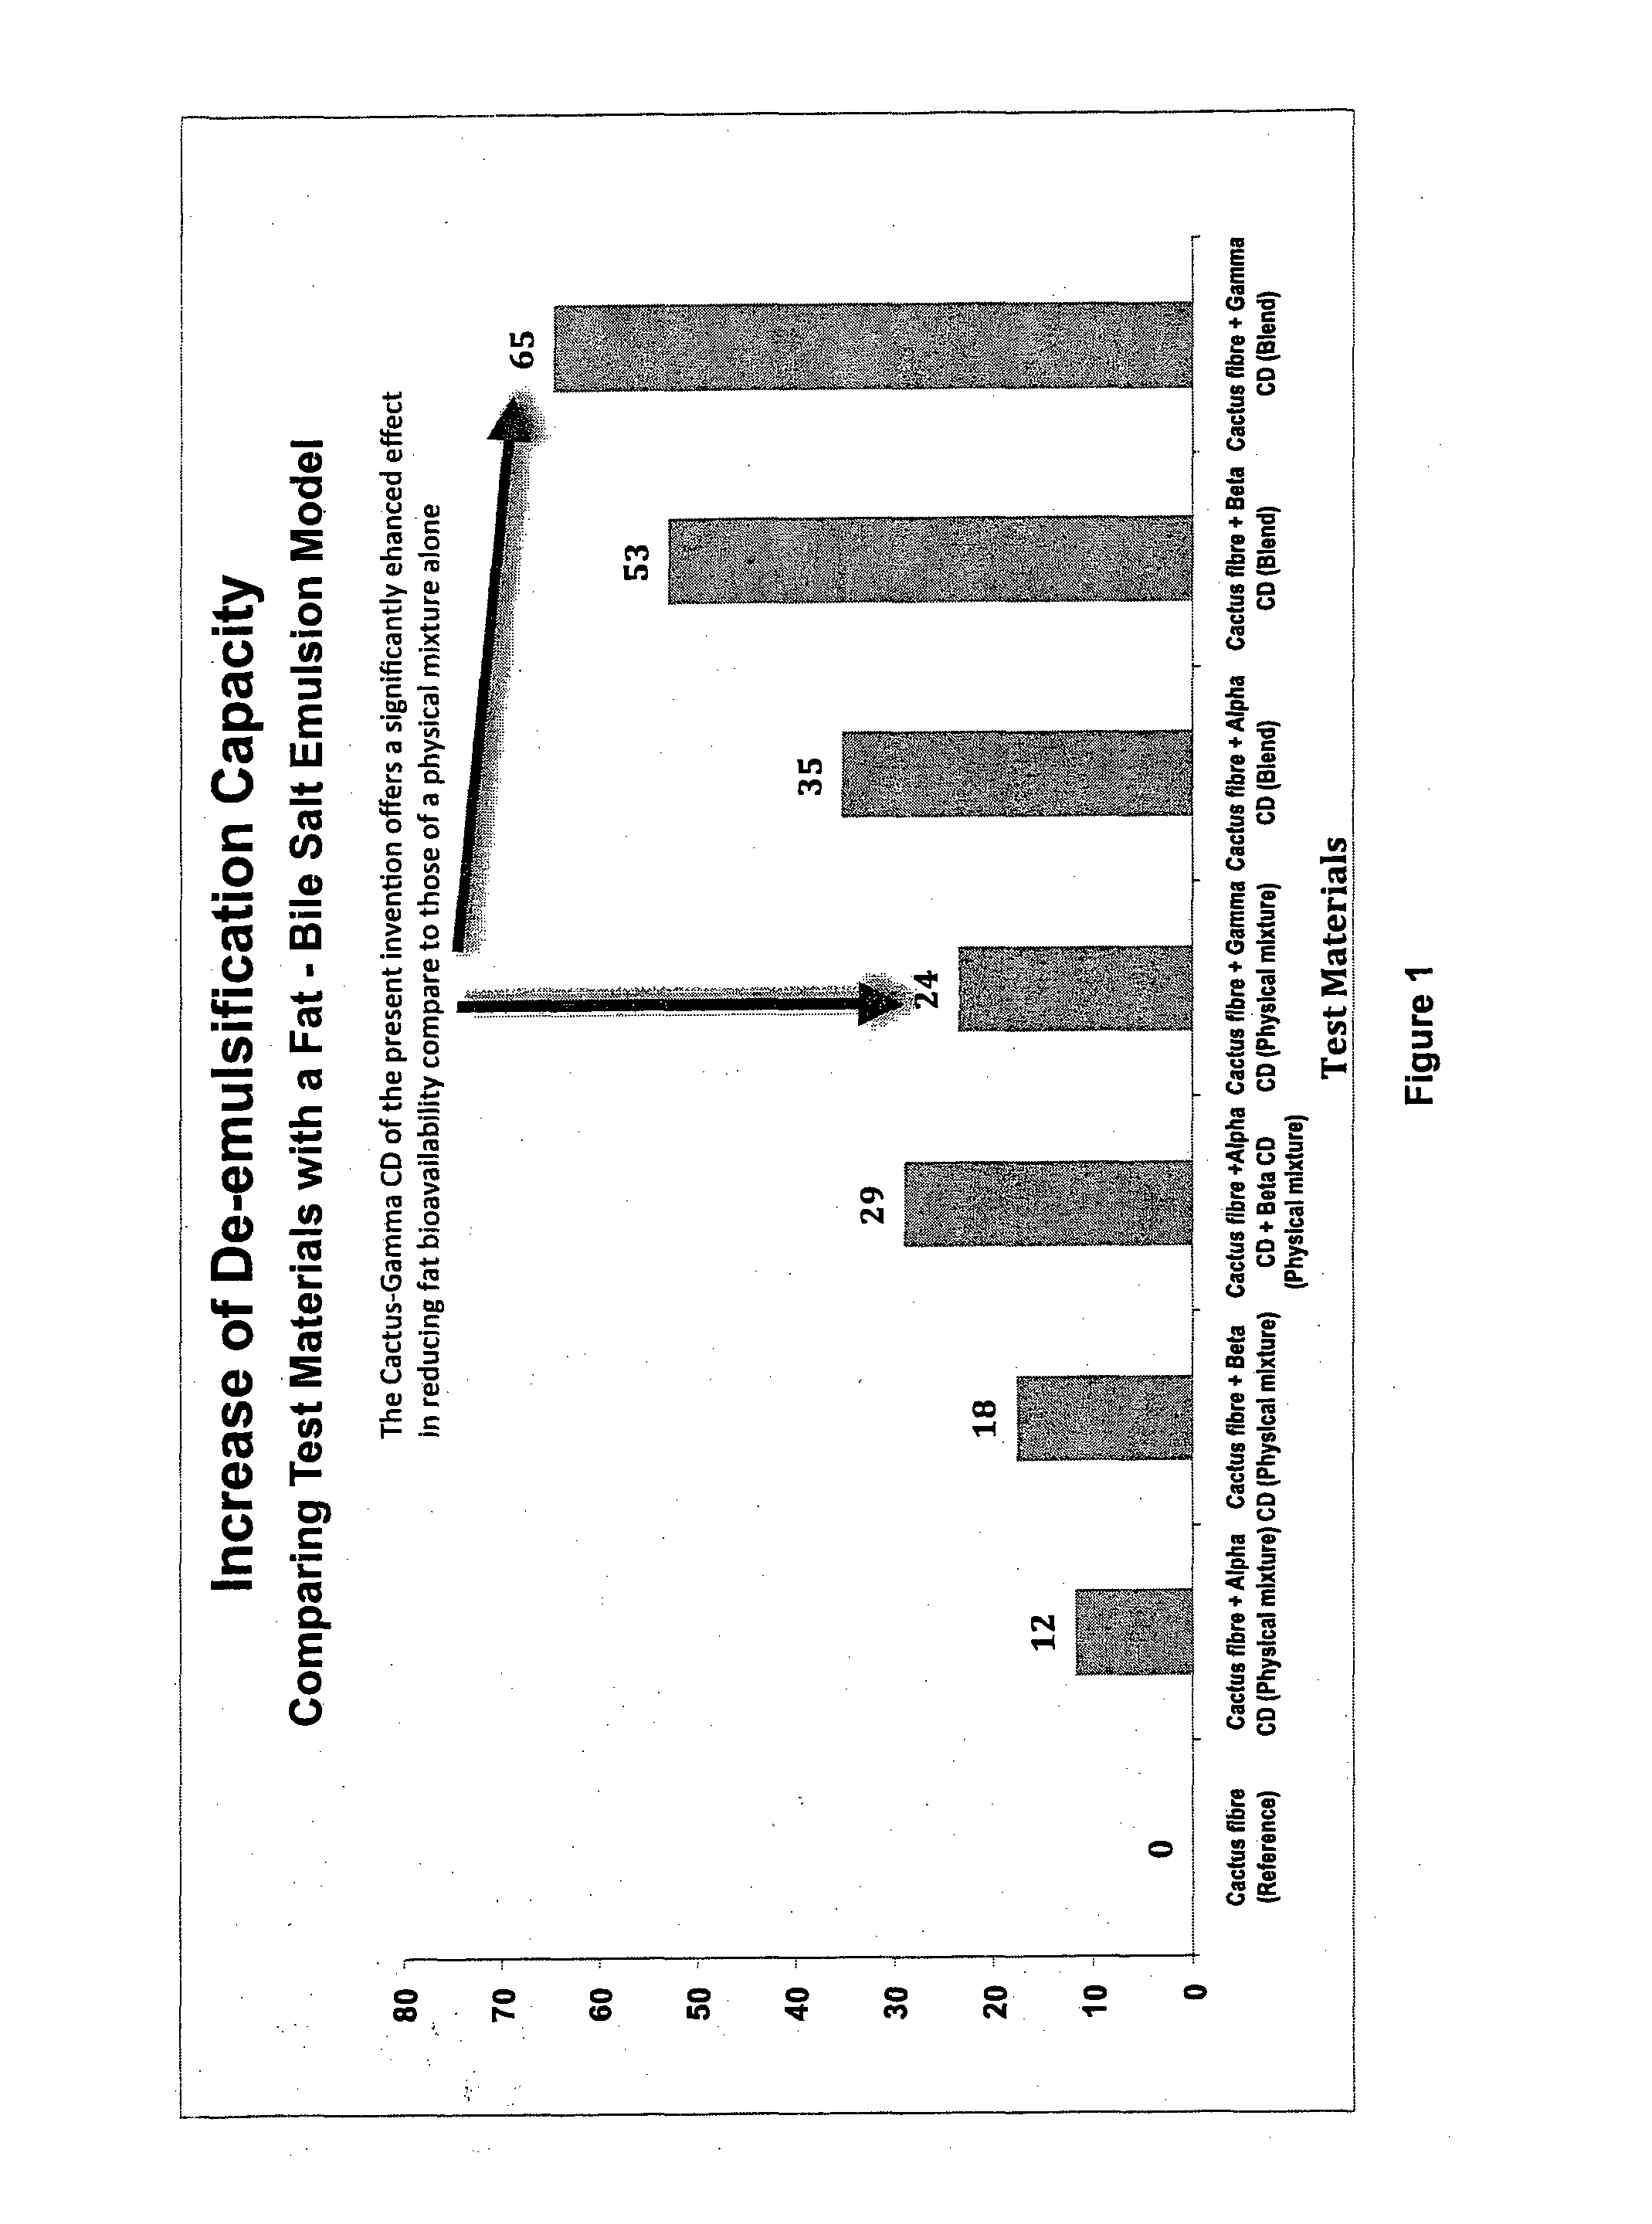 Composition for reducing absorption of dietary fat